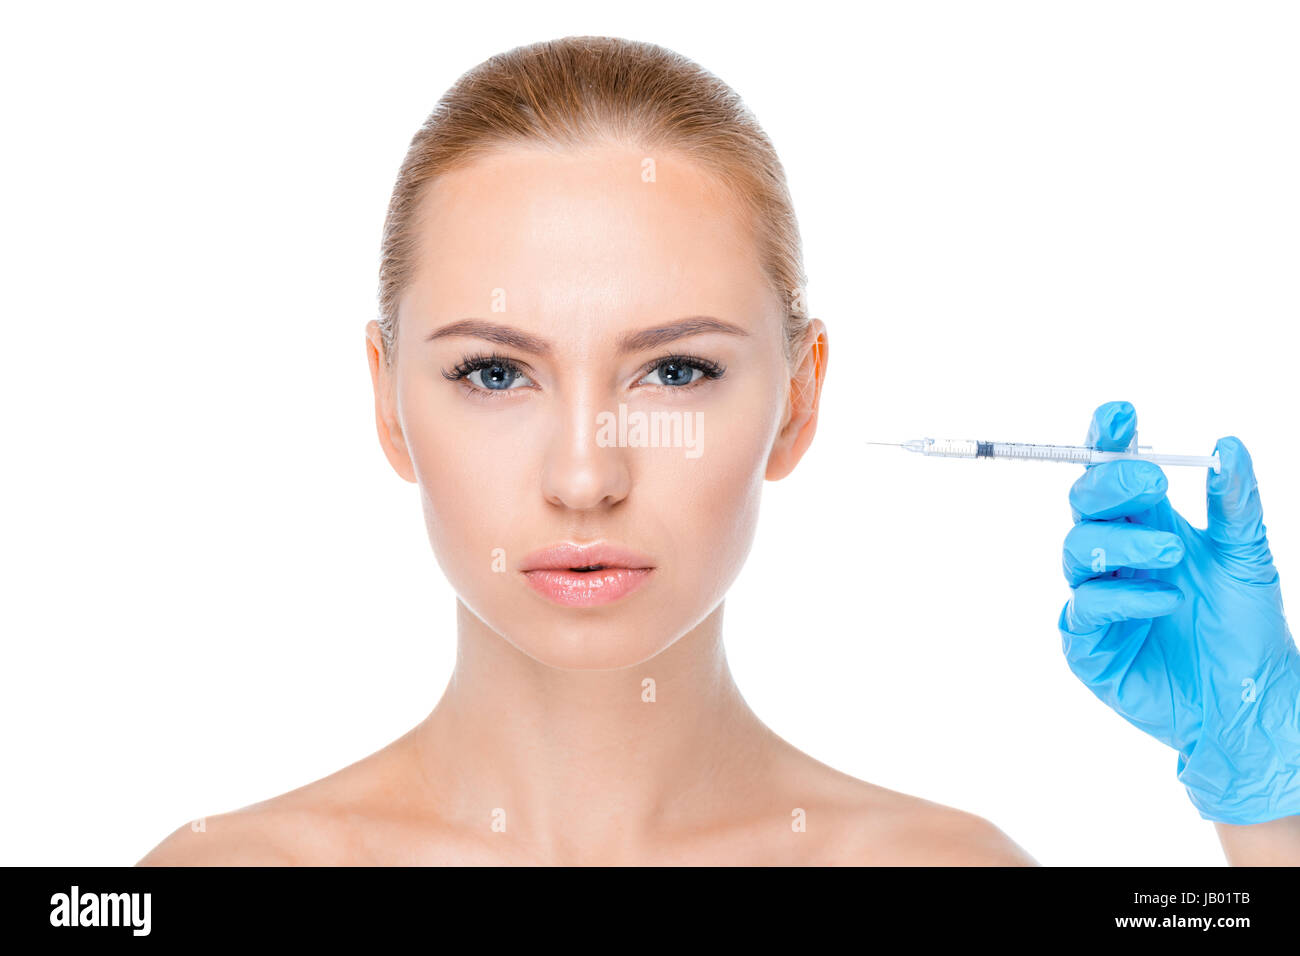 portrait of serious woman getting botox injection on white Stock Photo